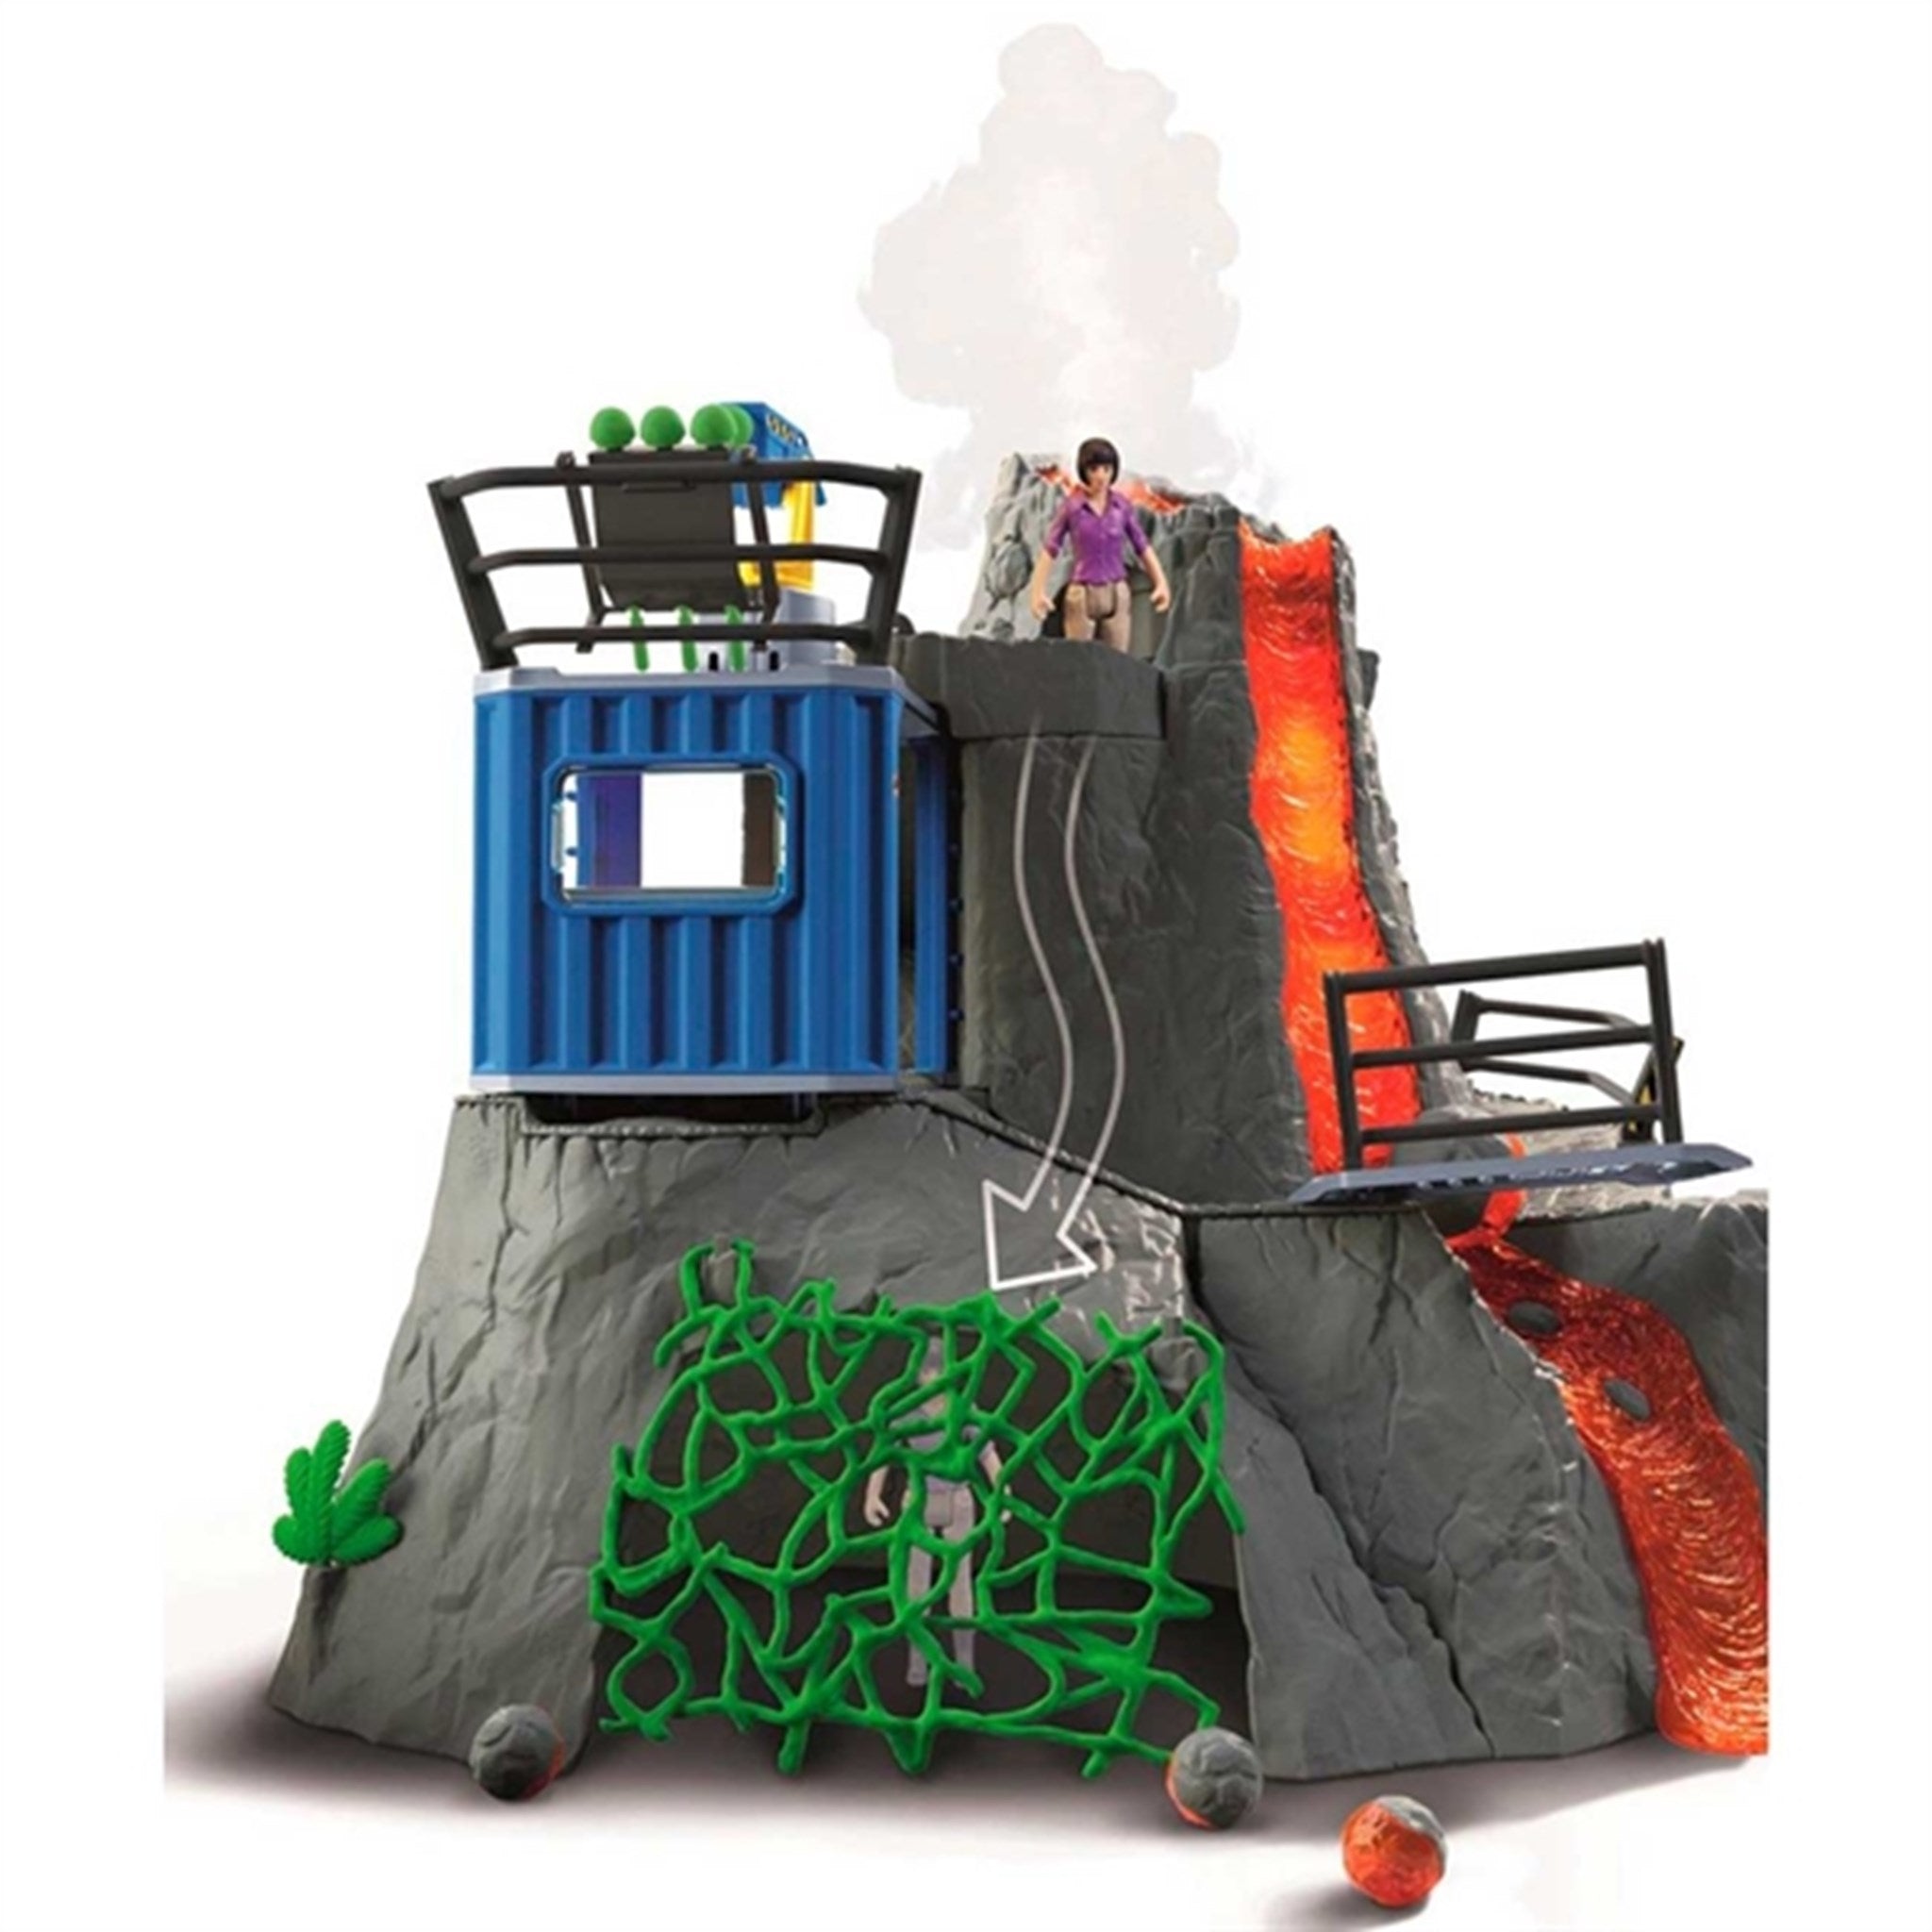 Schleich Dinosaurs Volcano Expedition Base Camp 2